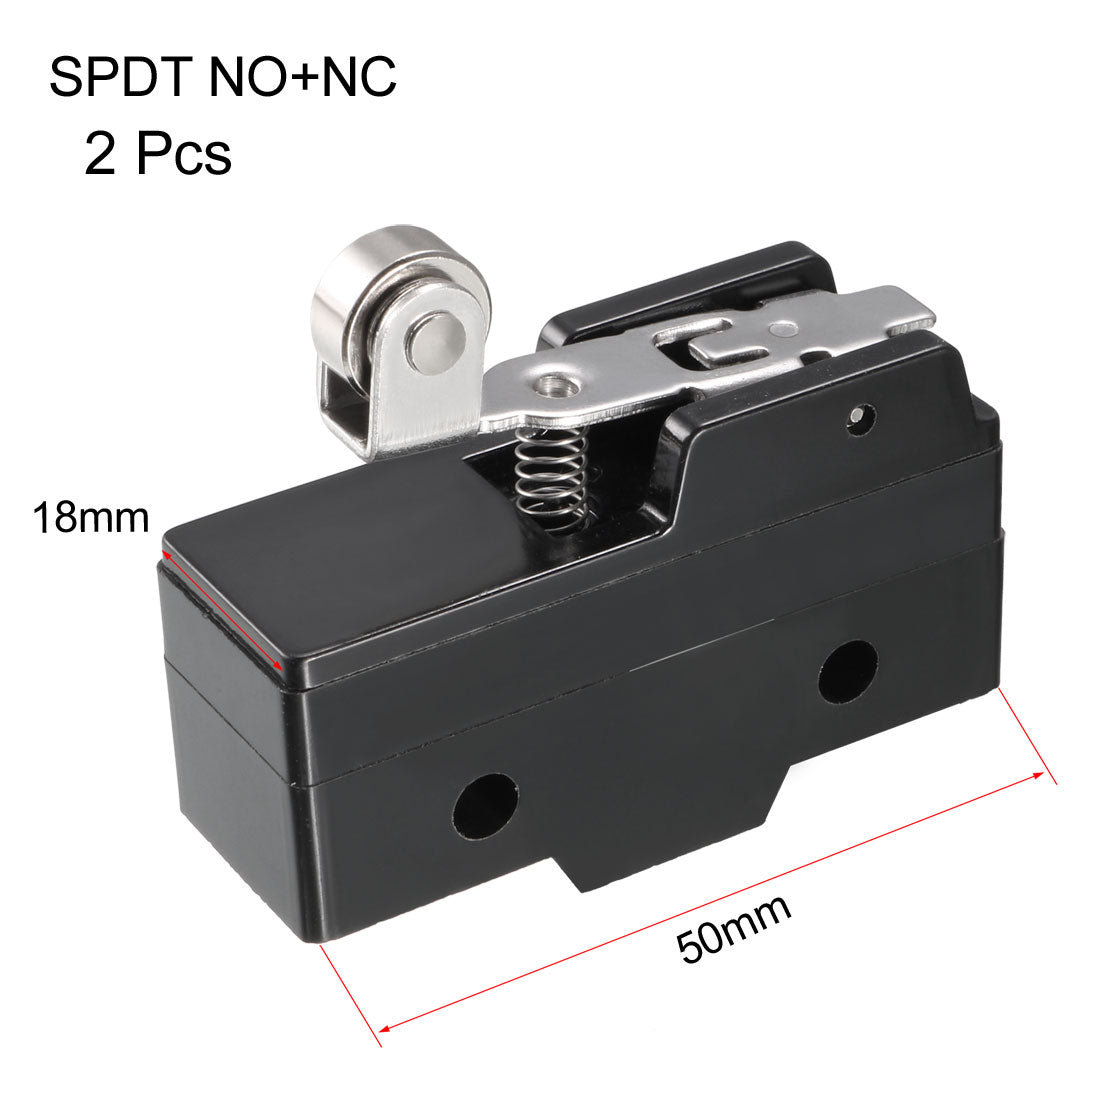 uxcell Uxcell 2PCS TM-1704 SPDT 1NO+1NC Panel Mount Short Hinge Roller Lever Type Micro Limit Switch Screw Terminals